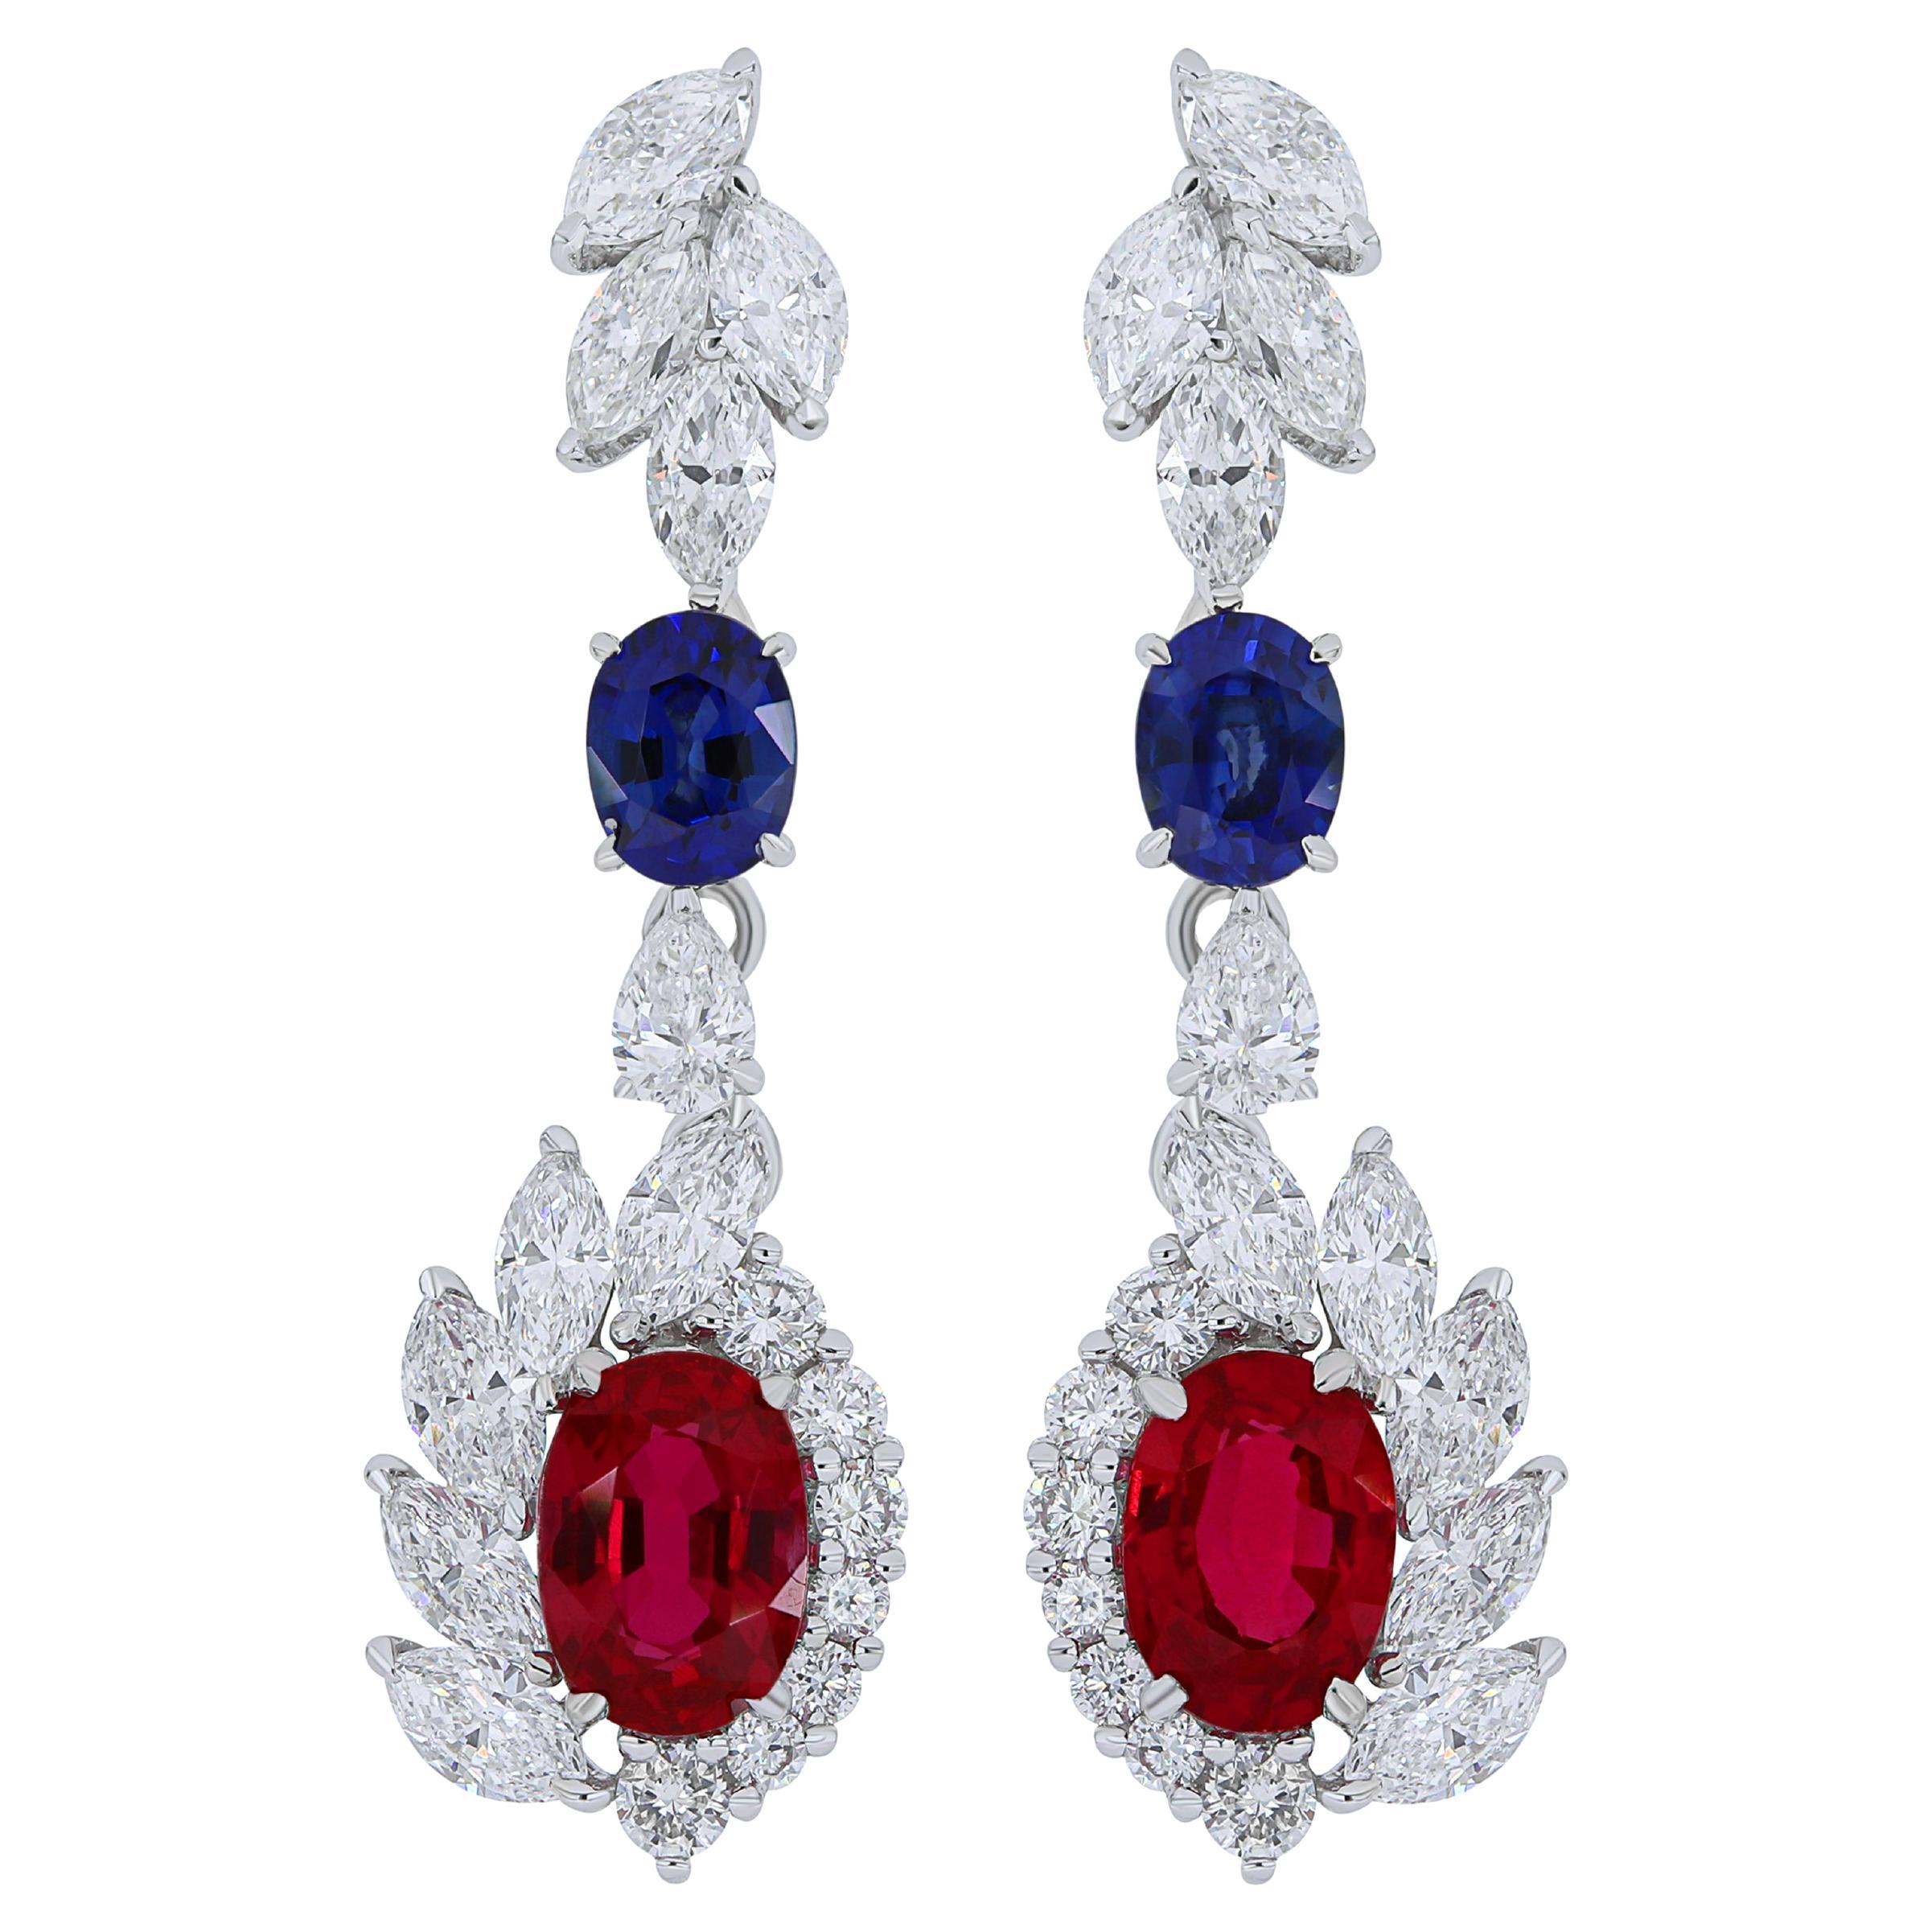 Ruby, Blue Sapphire and Diamond Studded Earrings in 18 Karat White Gold